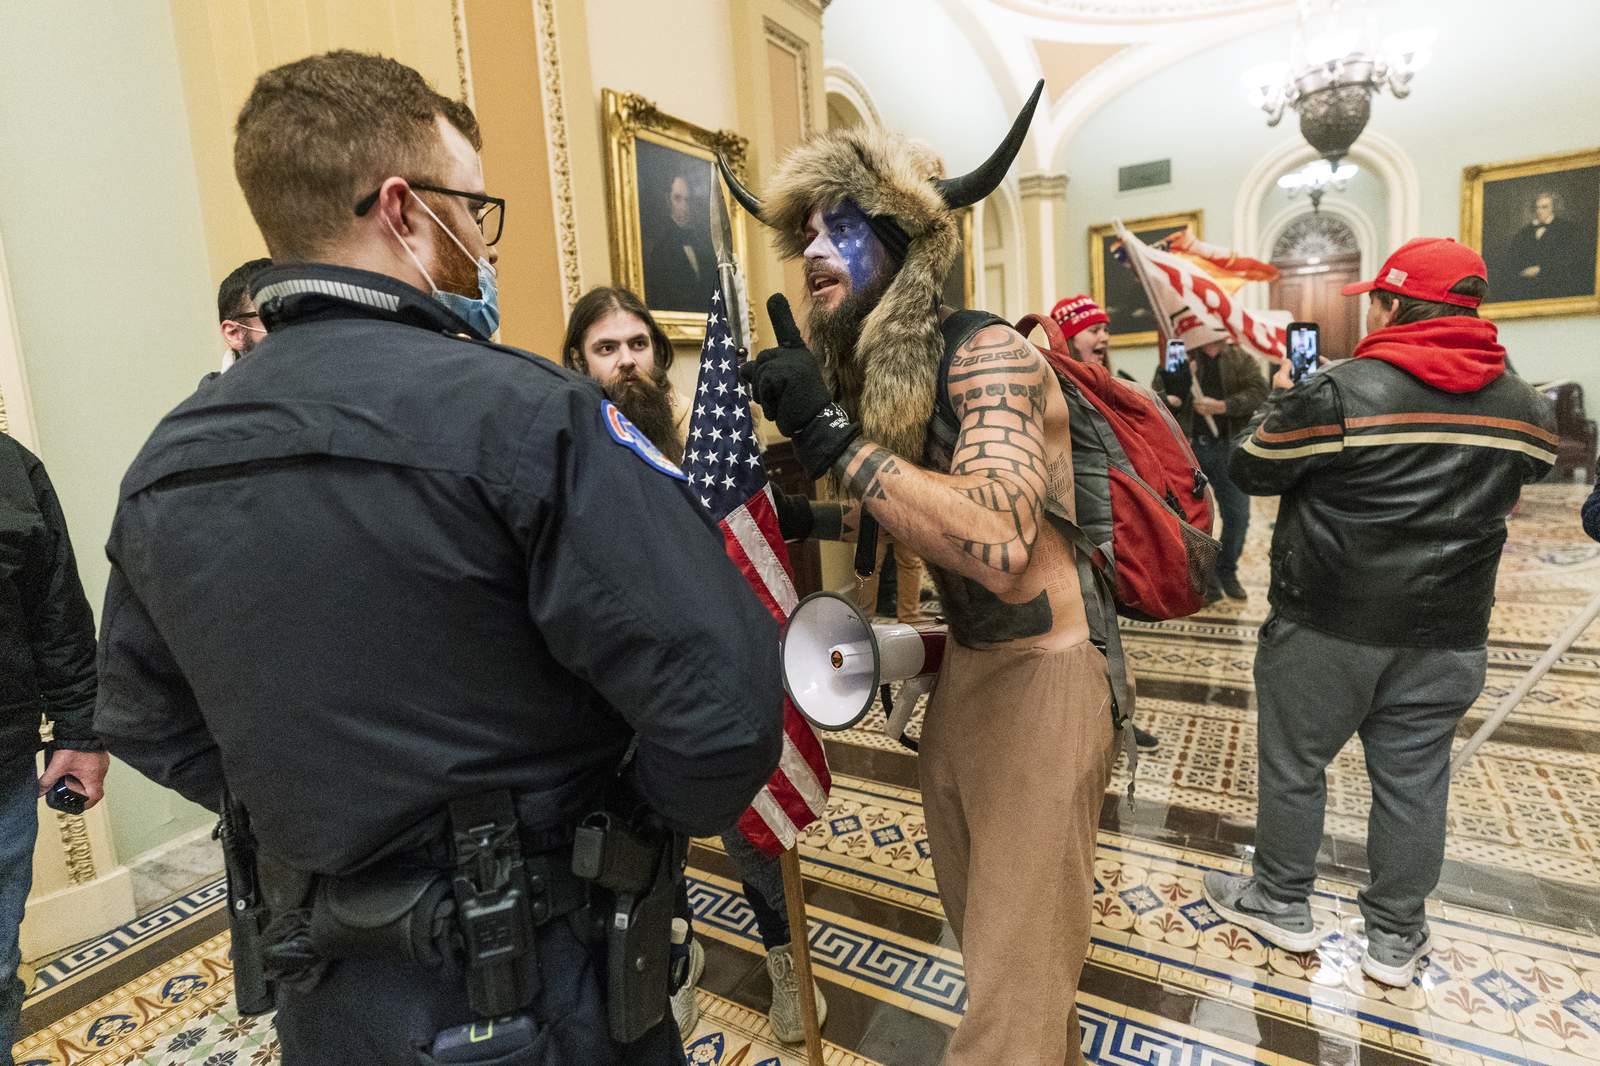 More arrests in Capitol riot as more video reveals brutality